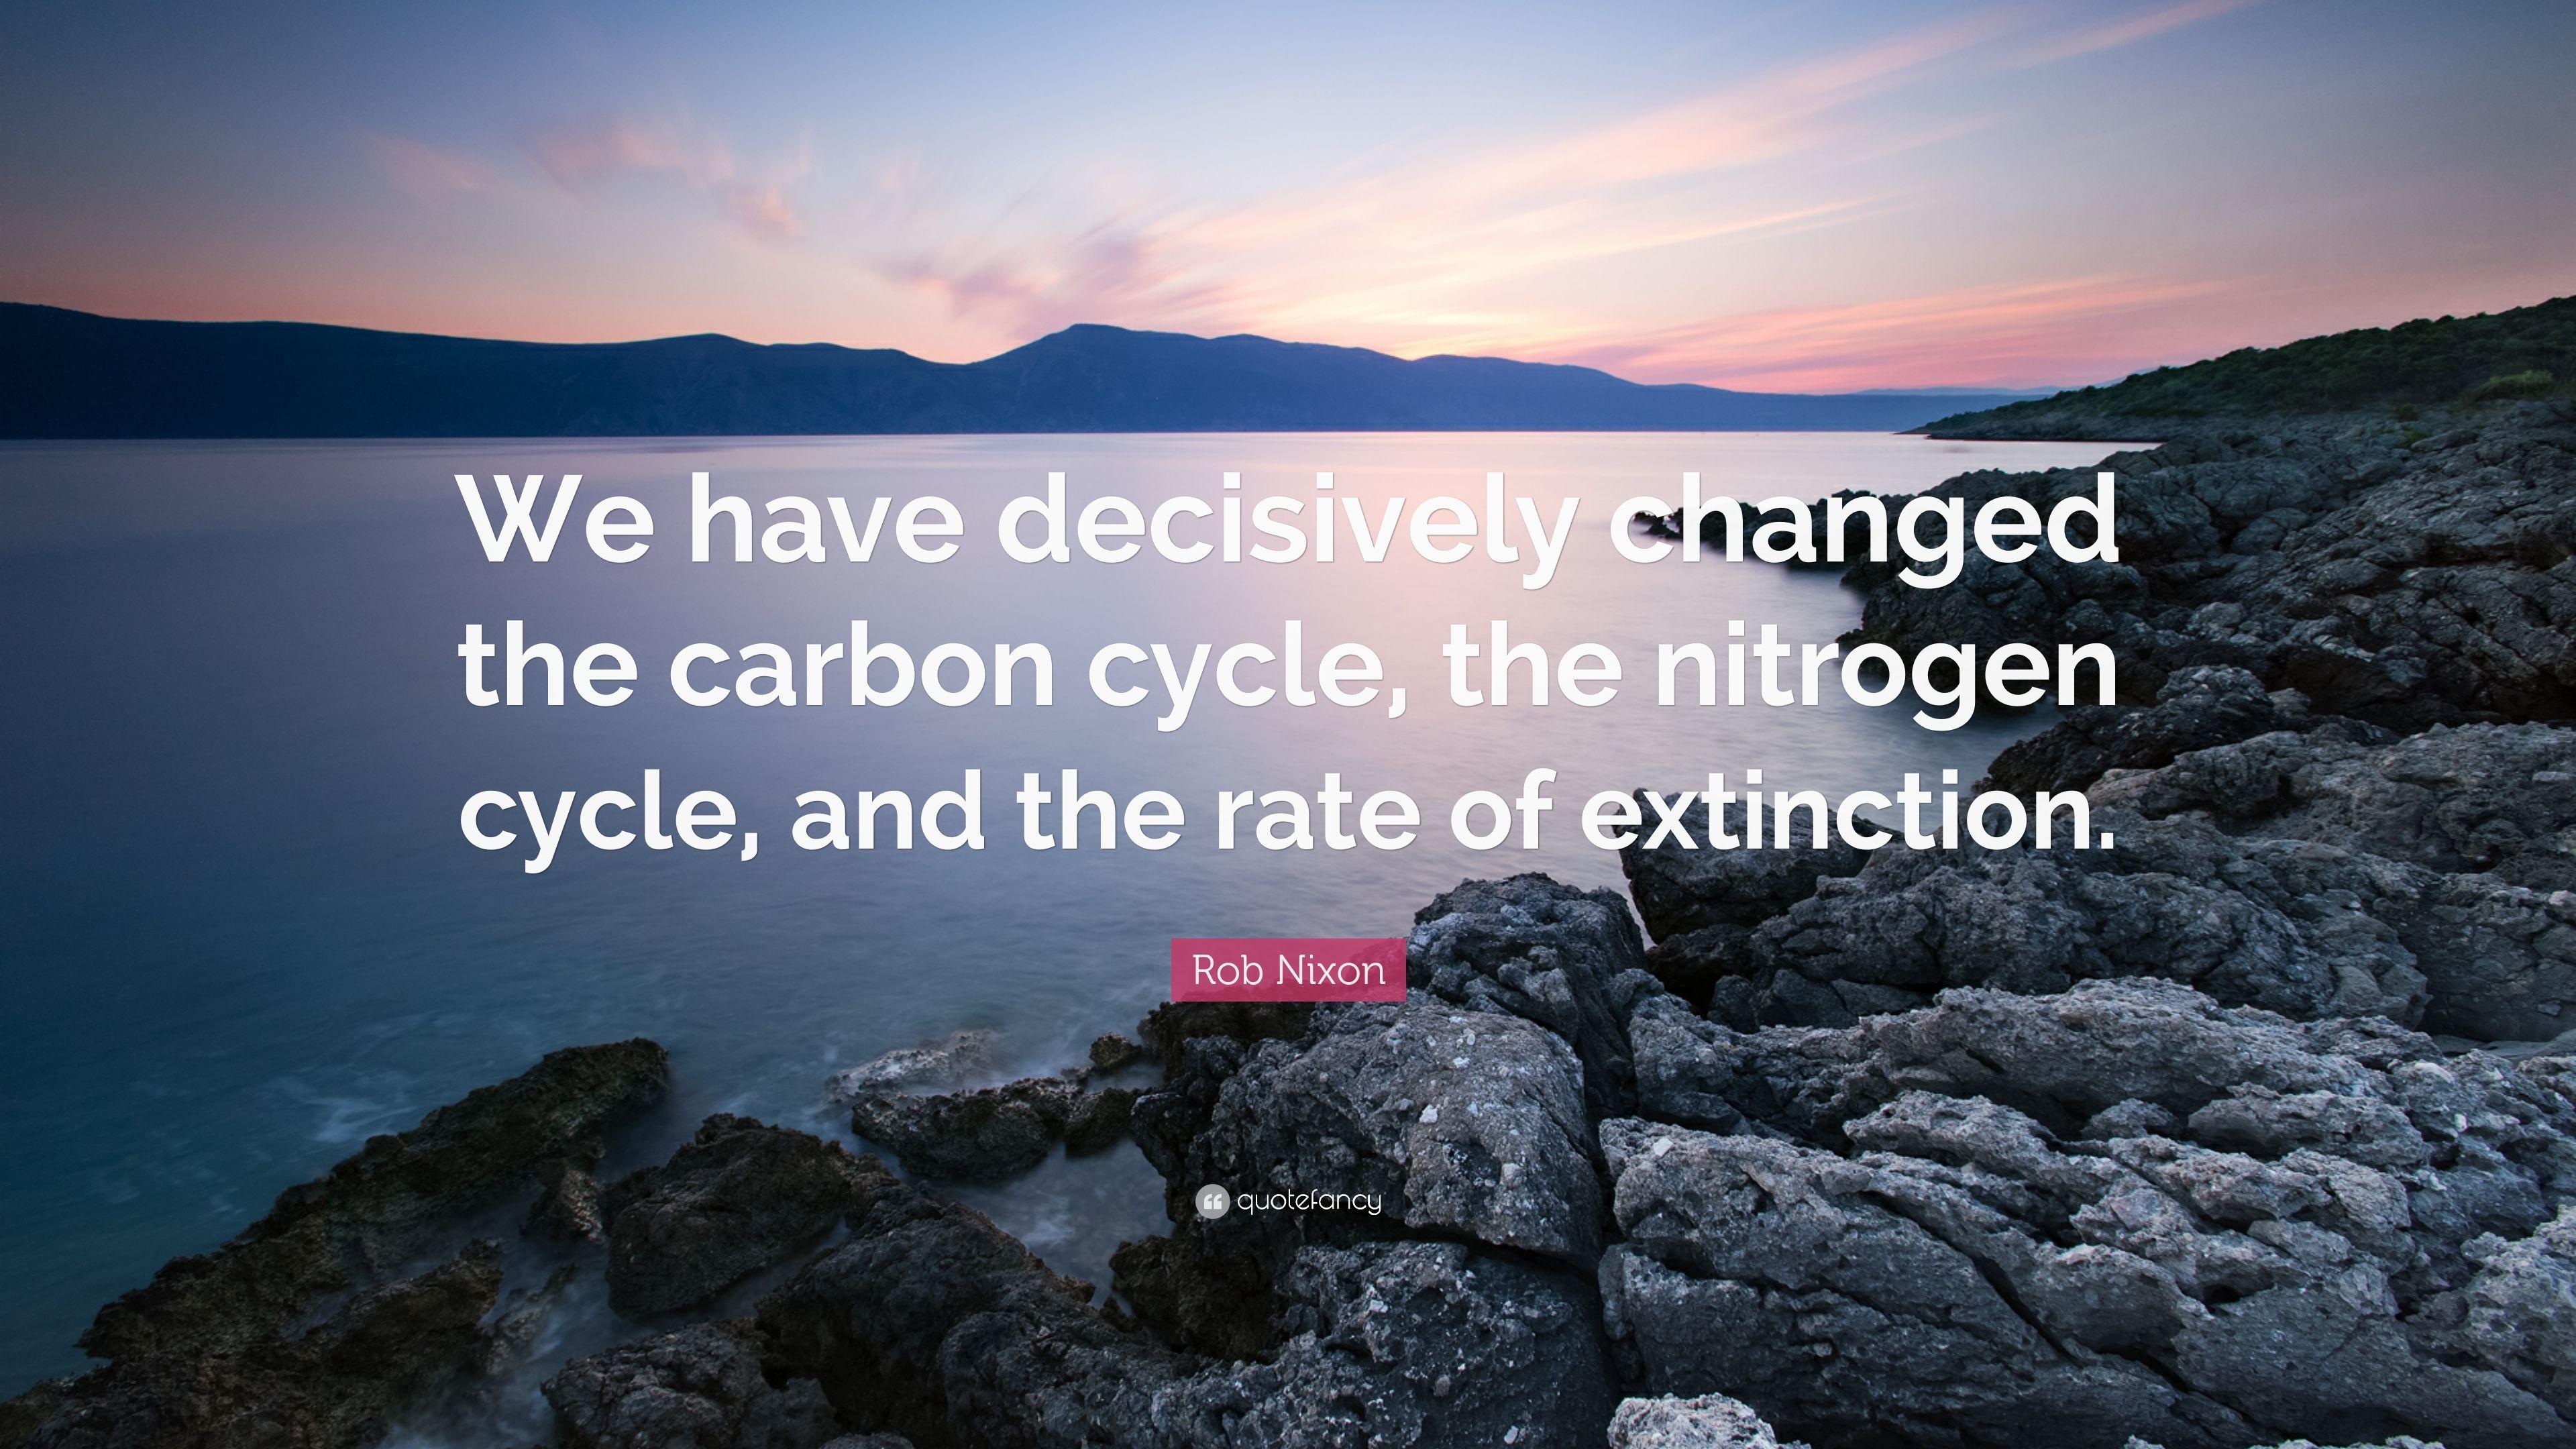 Rob Nixon Quote: “We have decisively changed the carbon cycle